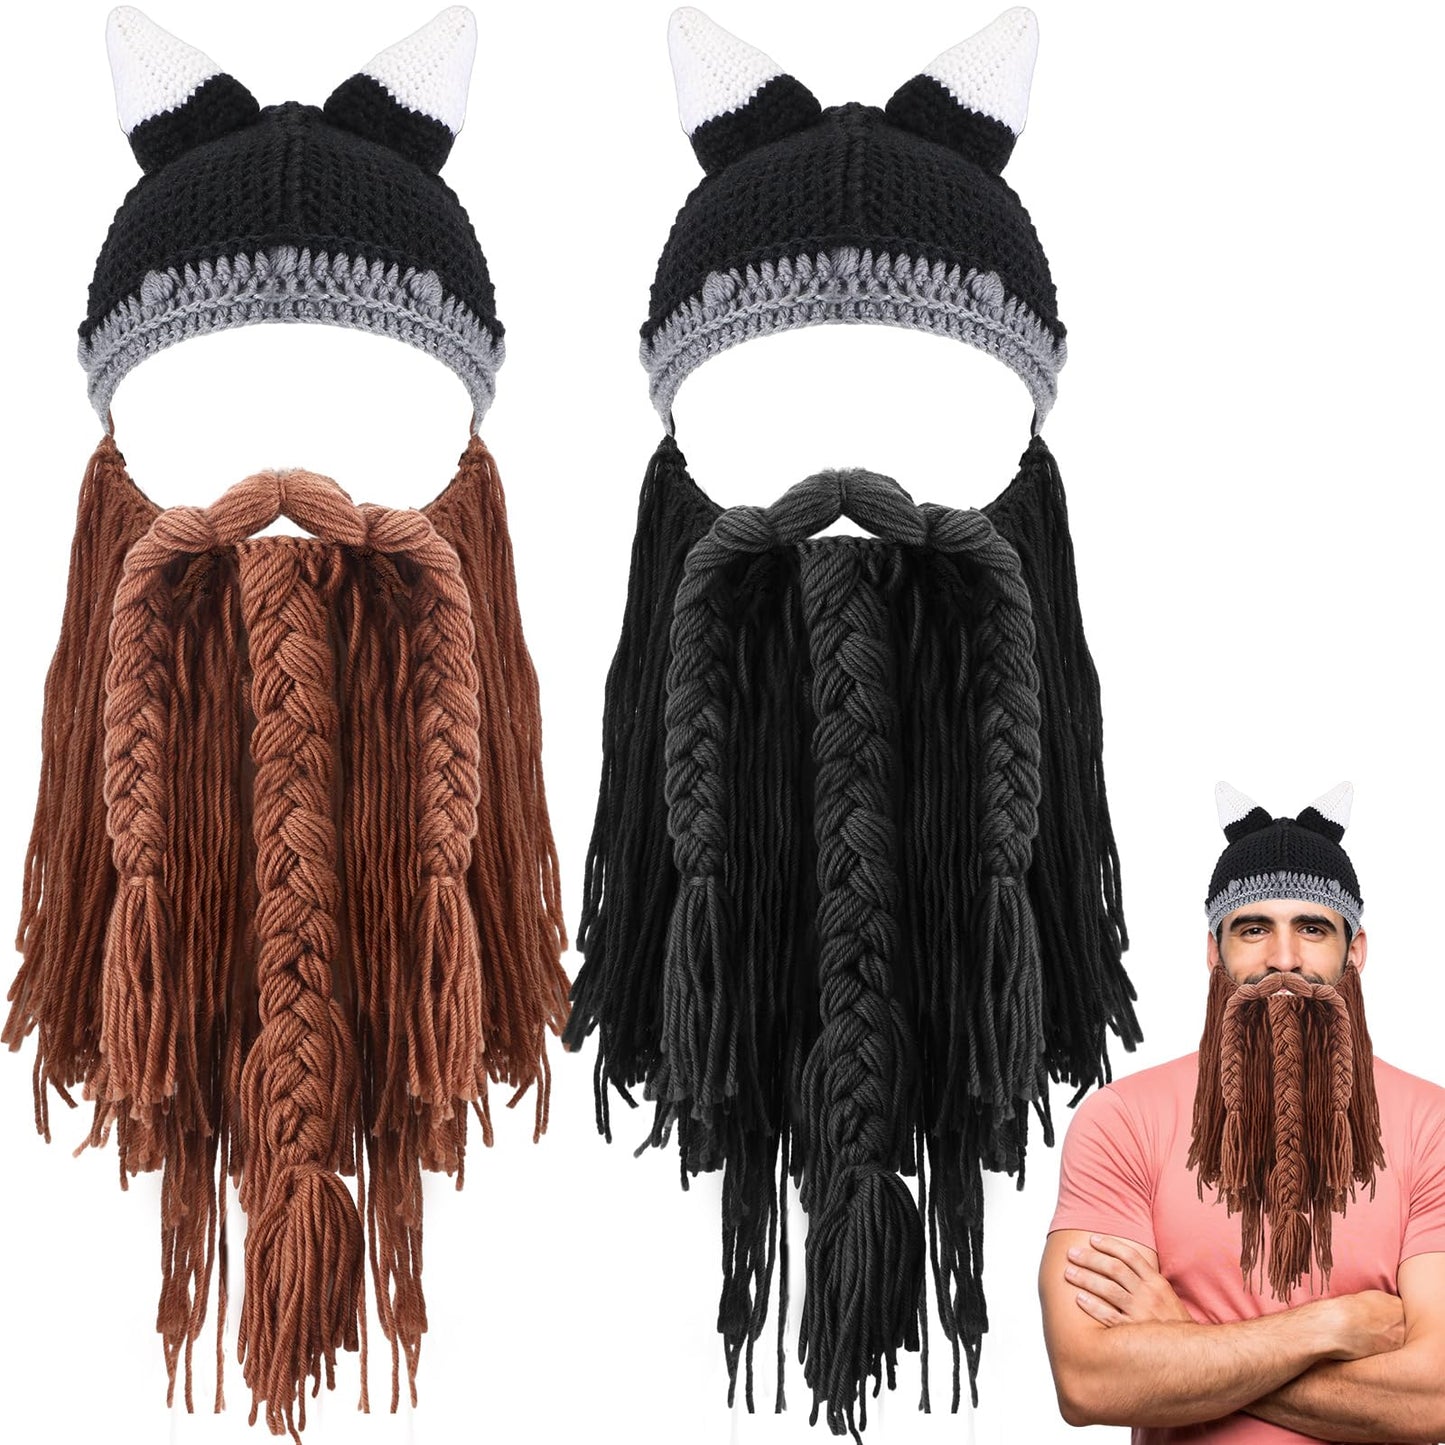 Xtinmee 2 Pcs Viking Horn Beard Hat Handmade Creative Knit Wig Mask Barbarian Facemask Beanie Knitted Winter Beard Caps Funny Ski Accessories for Adult Men Halloween Costume Black, Brown Warm